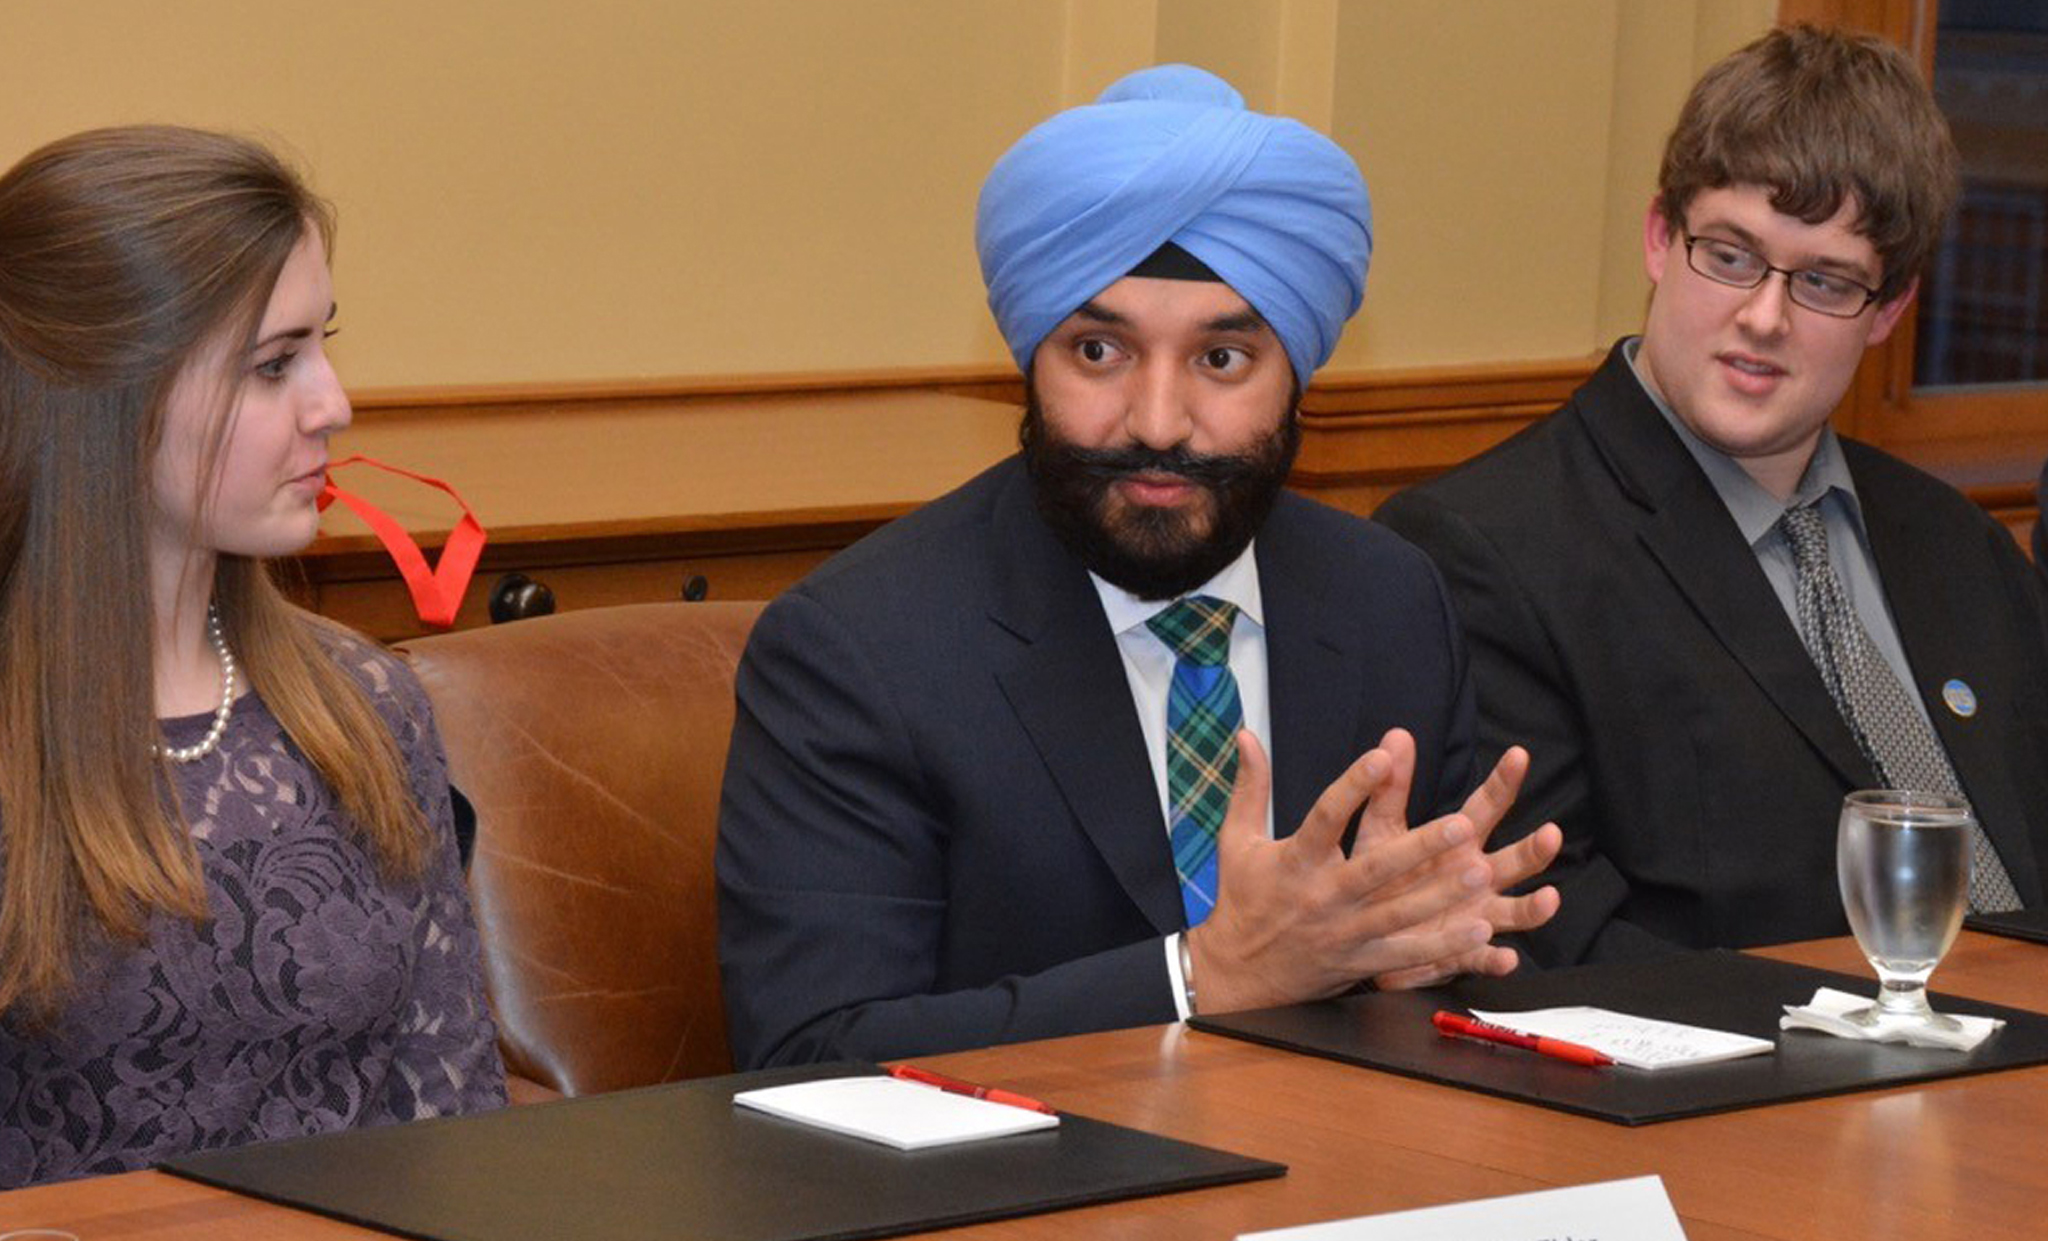 January 26, 2017 - The Honourable Navdeep Bains, Minister of Innovation, Science and Economic Development (centre), speaks with Acadia University students at a Youth Roundtable in Wolfville, Nova Scotia.